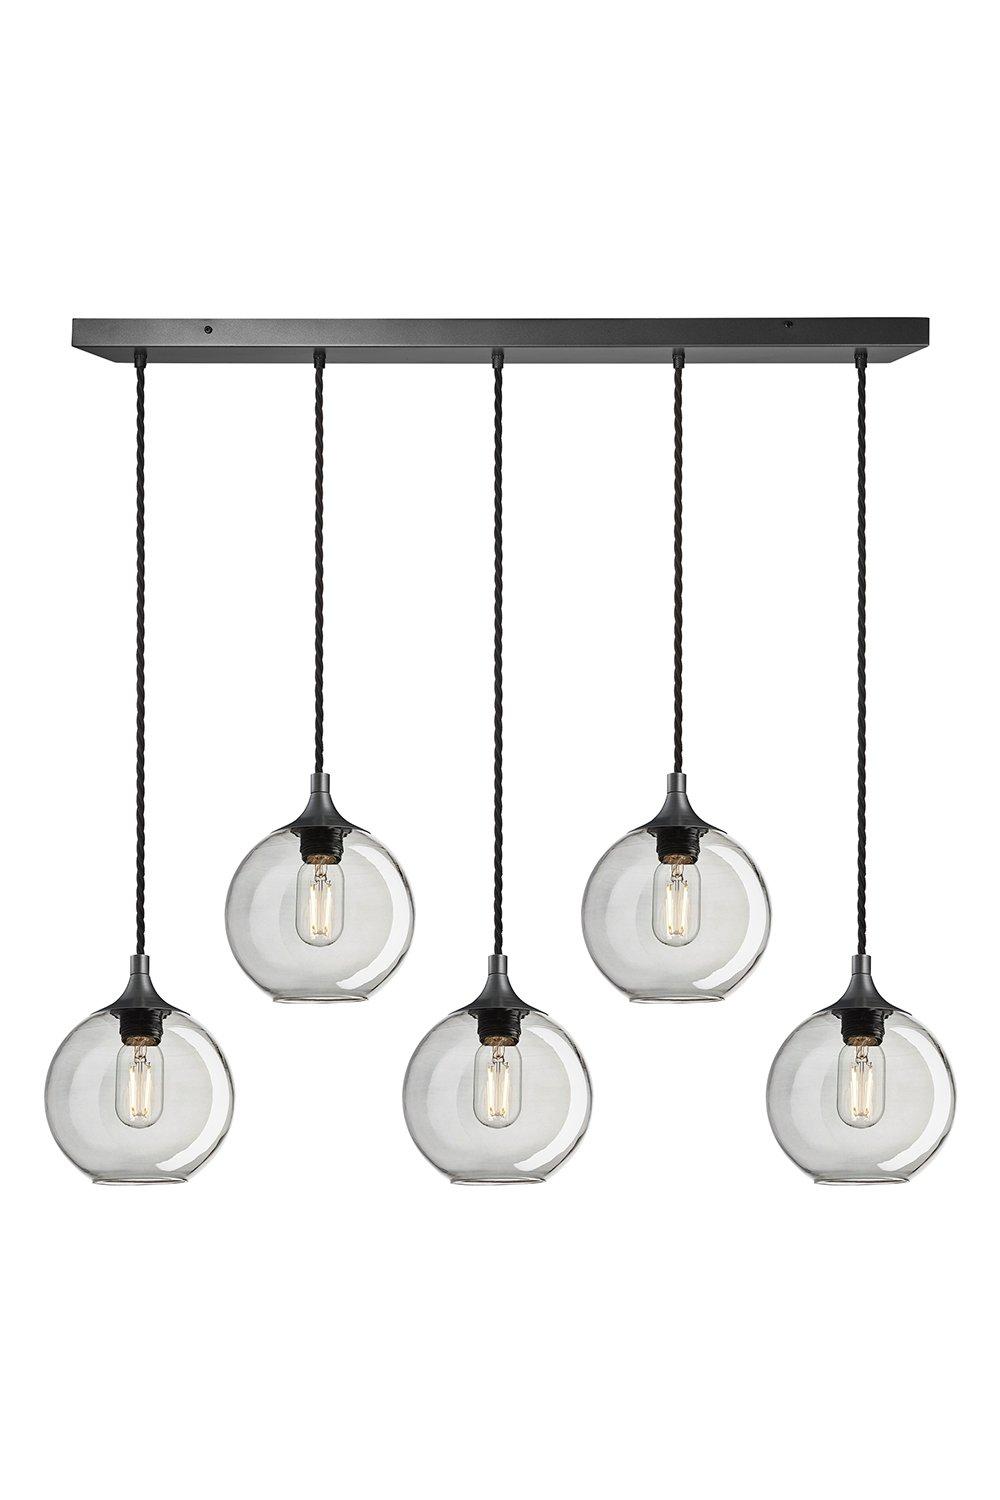 Chelsea Tinted Glass Globe 5 Wire Cluster Lights, 7 inch, Smoke Grey, Pewter holder